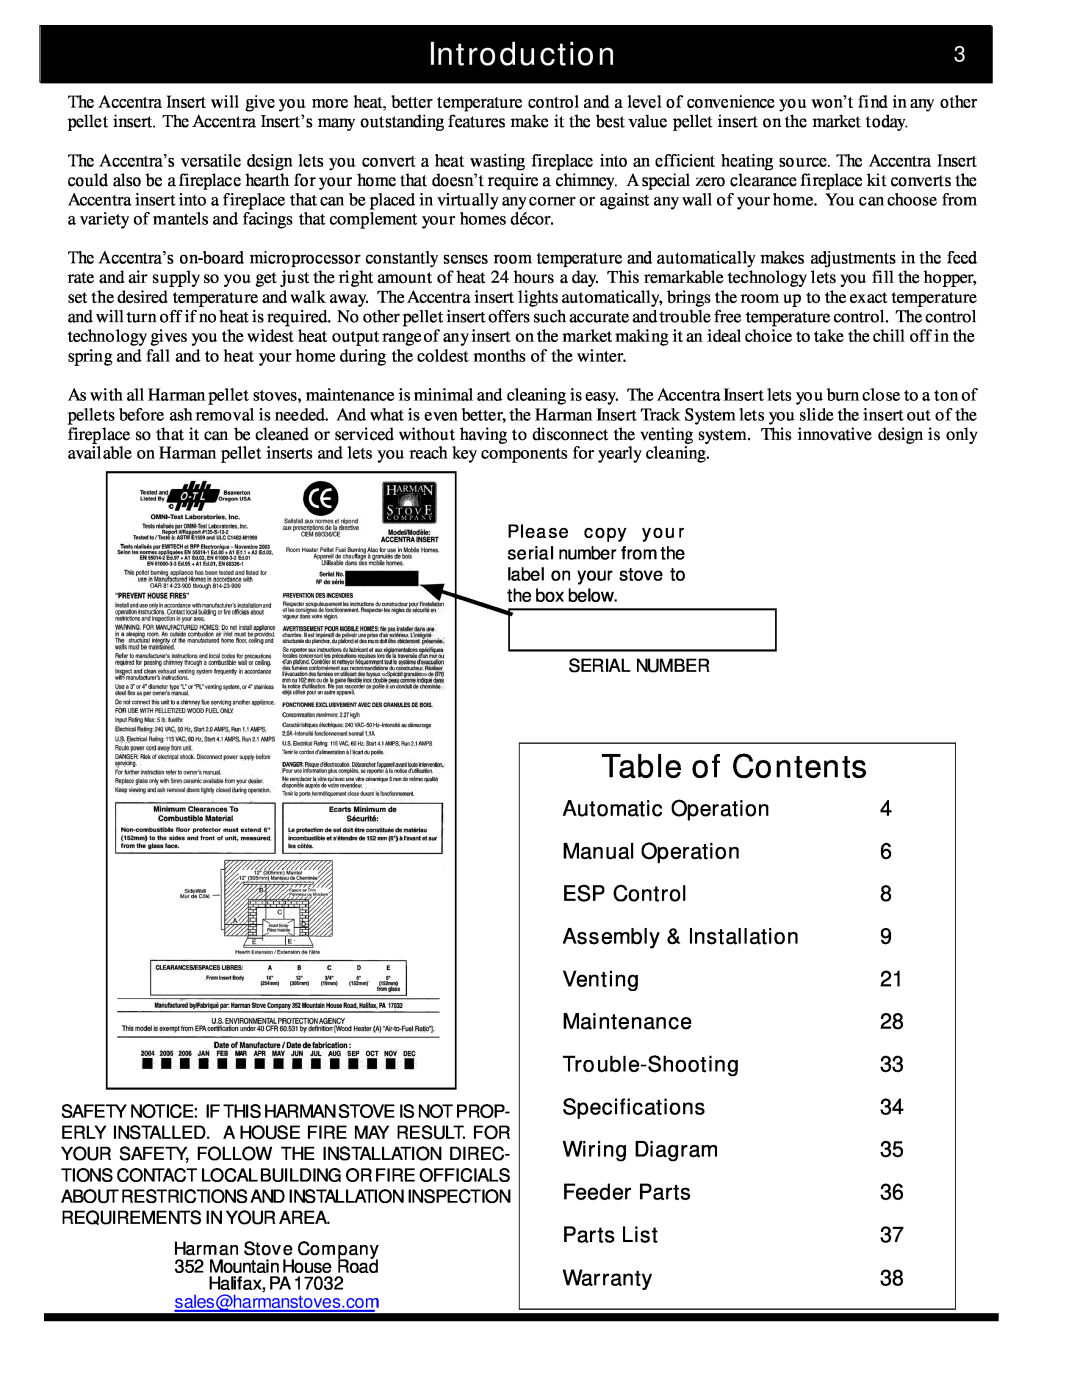 Harman Stove Company The Harman Accentra Pellet Insert manual Introduction3, Table of Contents 